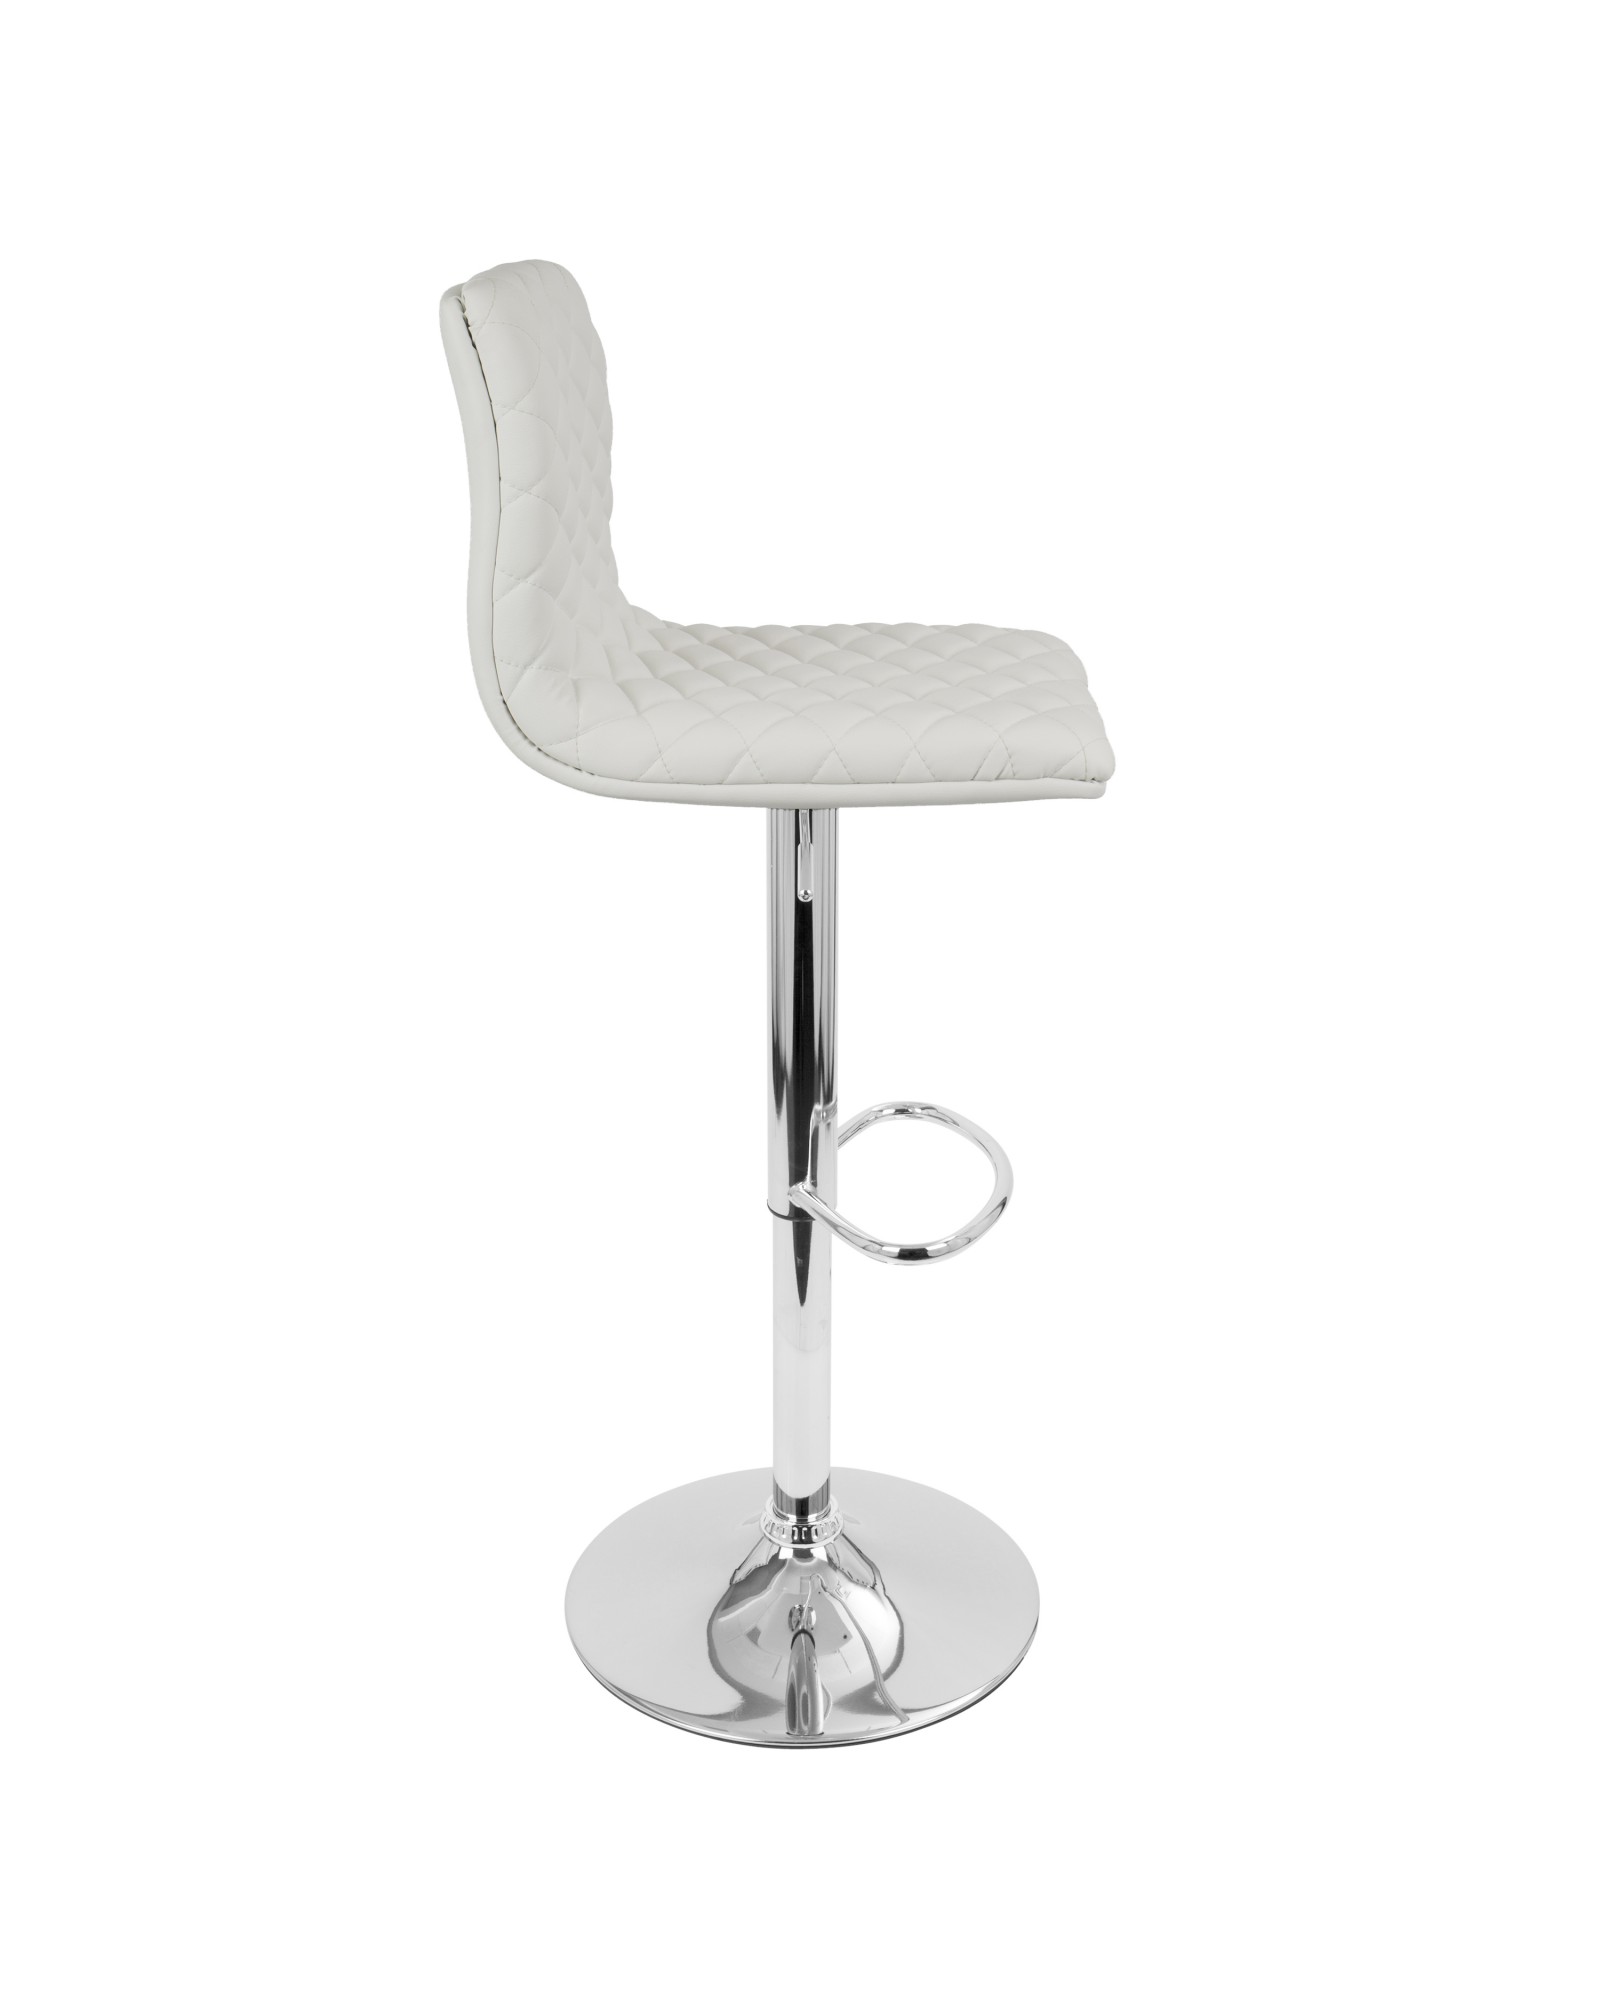 Caviar Contemporary Adjustable Barstool with Swivel in White Faux Leather